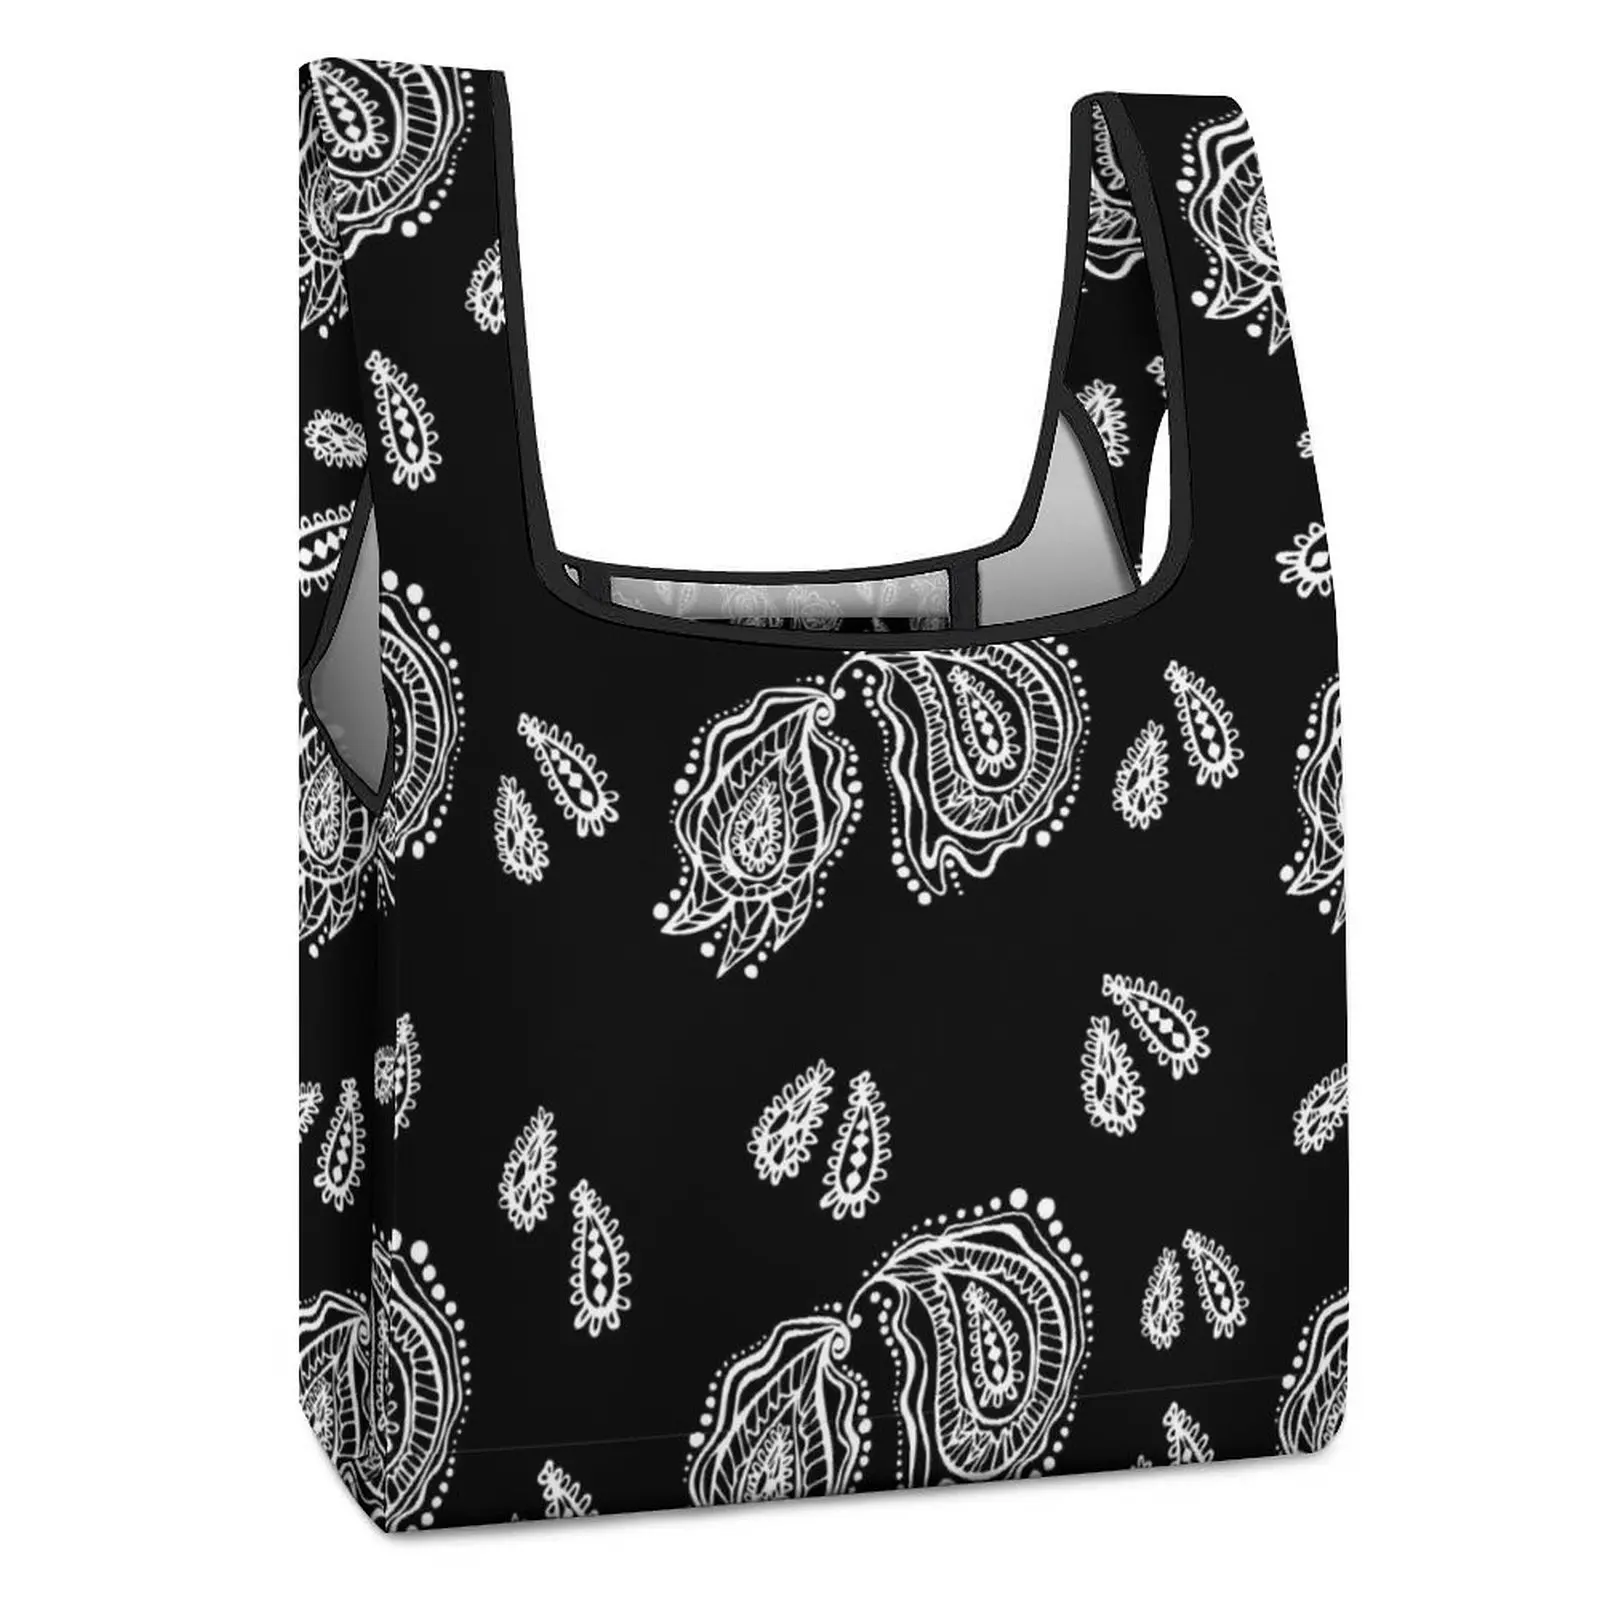 Customized Printed Bags Shopper Bag Black Exotic Ethnic Style Shopping Tote Casual Woman Grocery Customizable Pattern